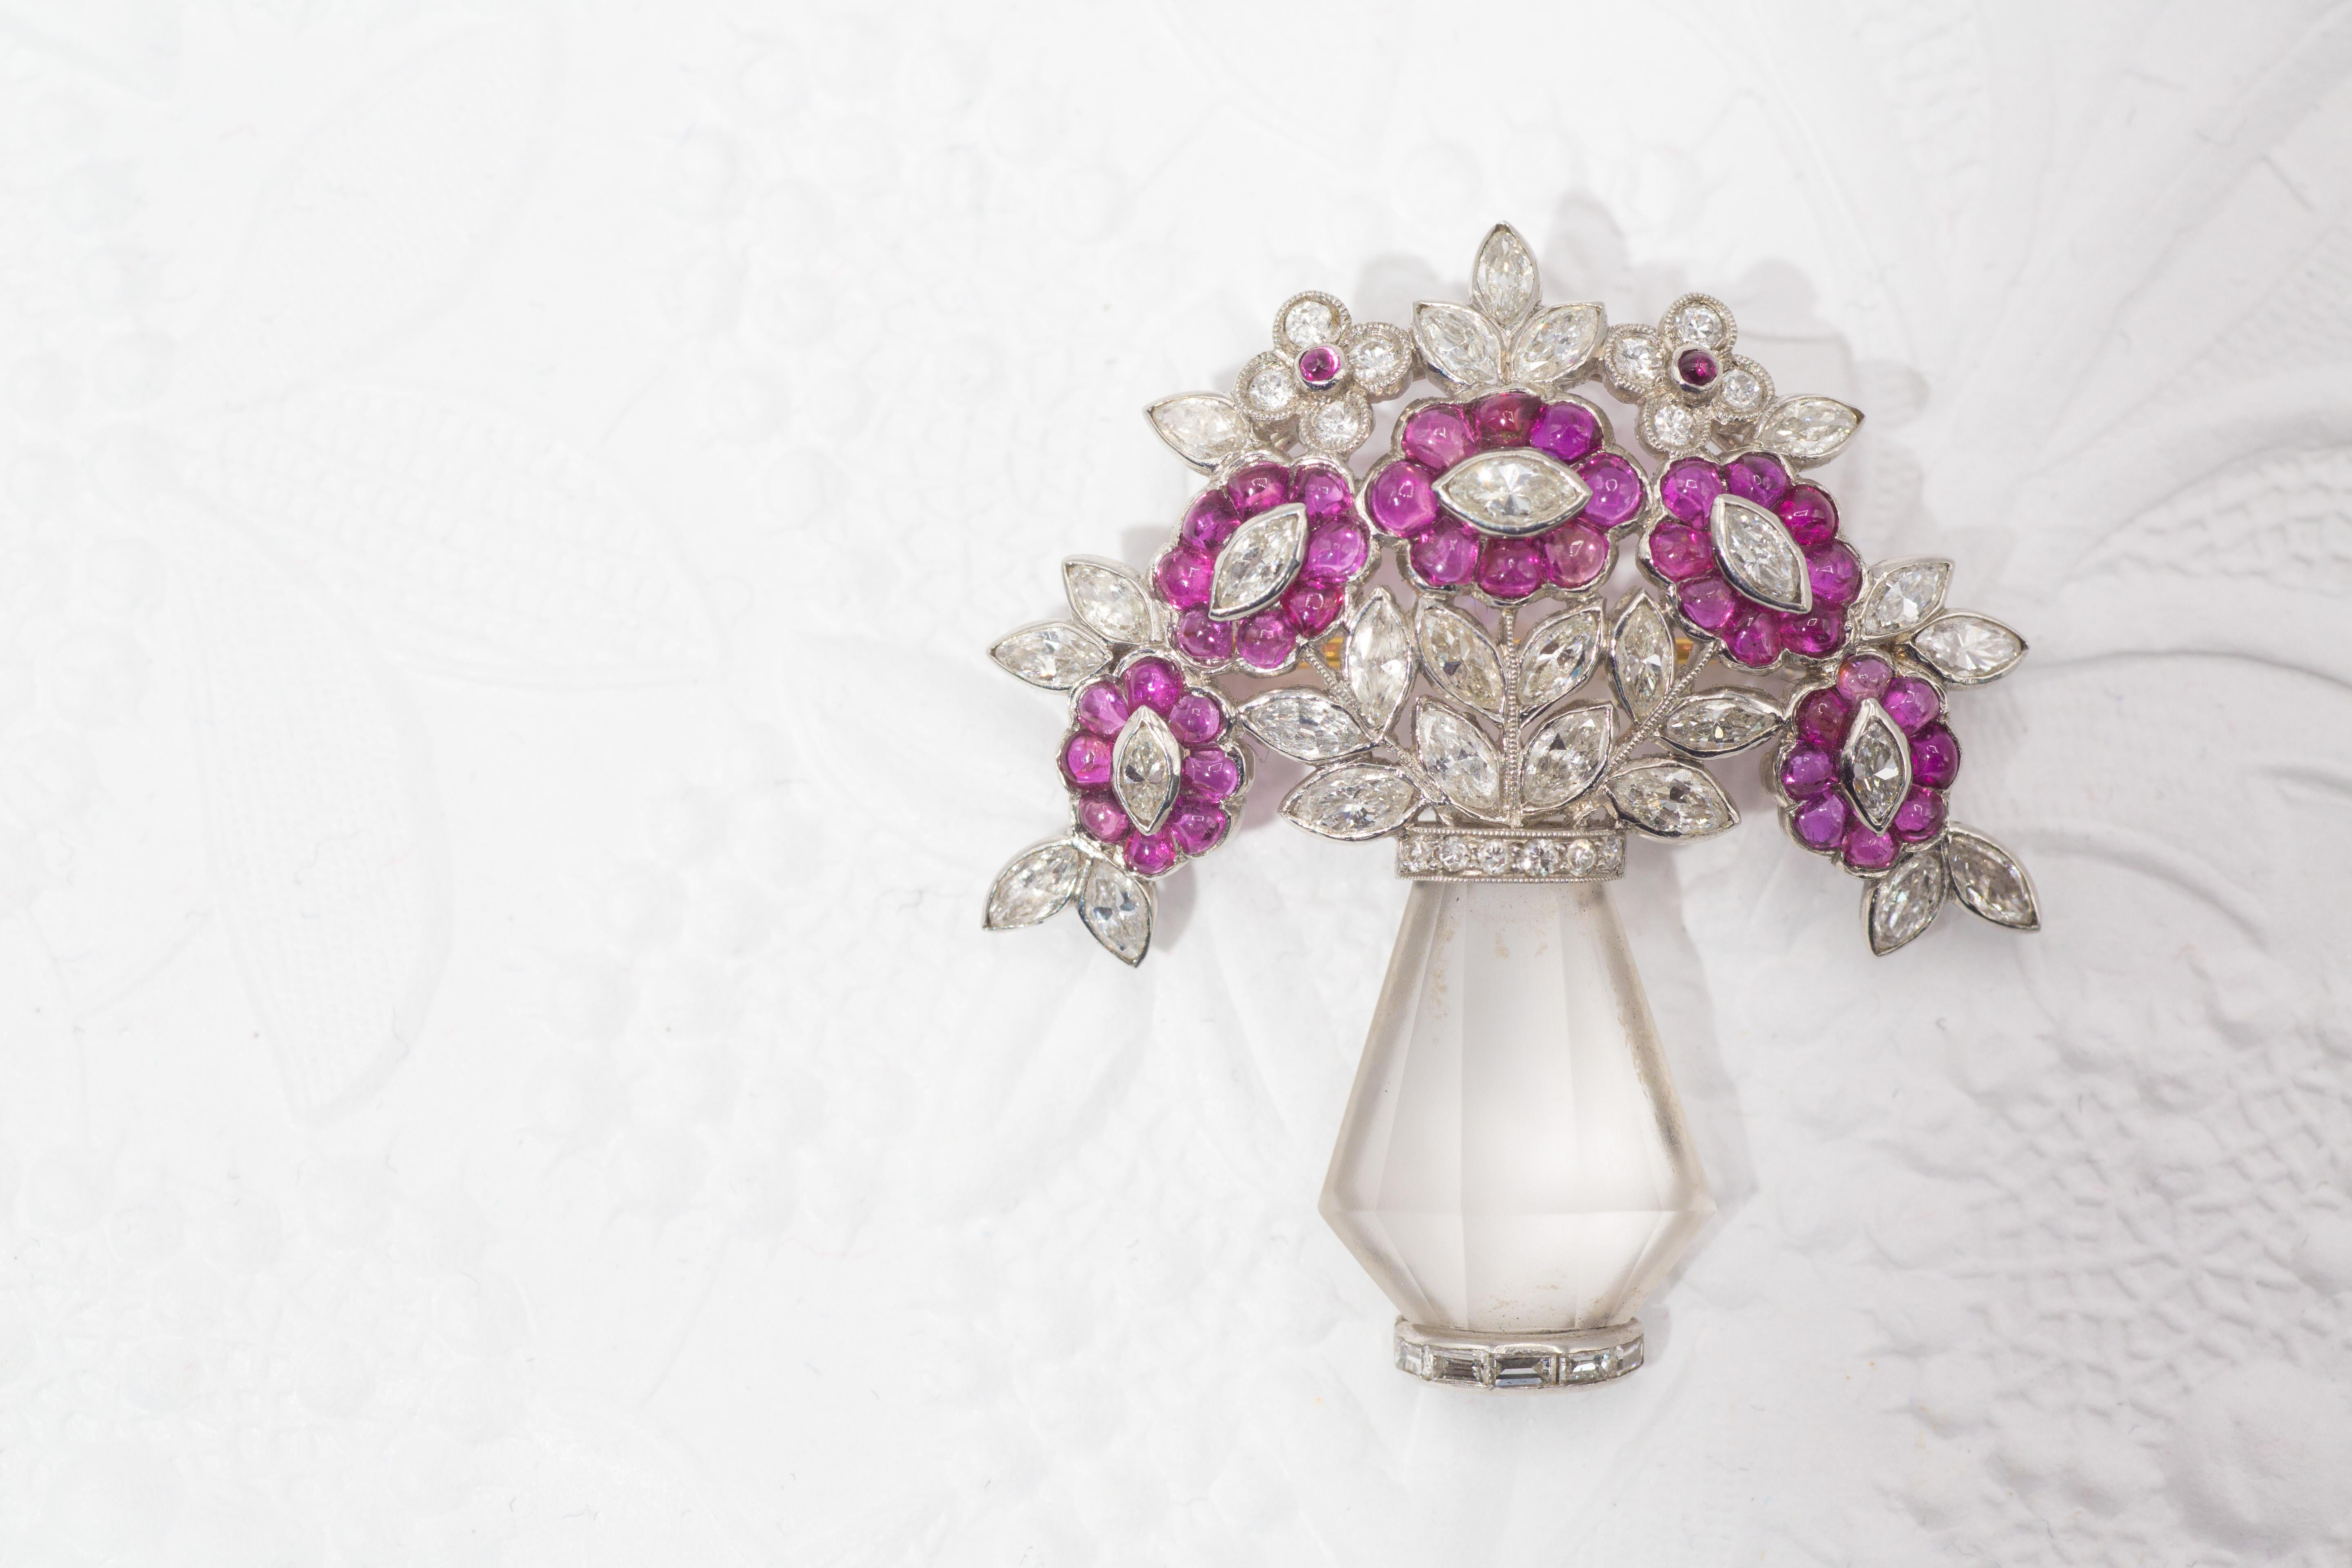 Unique Art Deco brooch from ca. 1930 in the form of a flower bouquet within a crystal vase. Amazingly well hand-crafted and beautifully designed, the brooch has been worked in platinum with Old European cut and old cut marquis shaped diamonds,